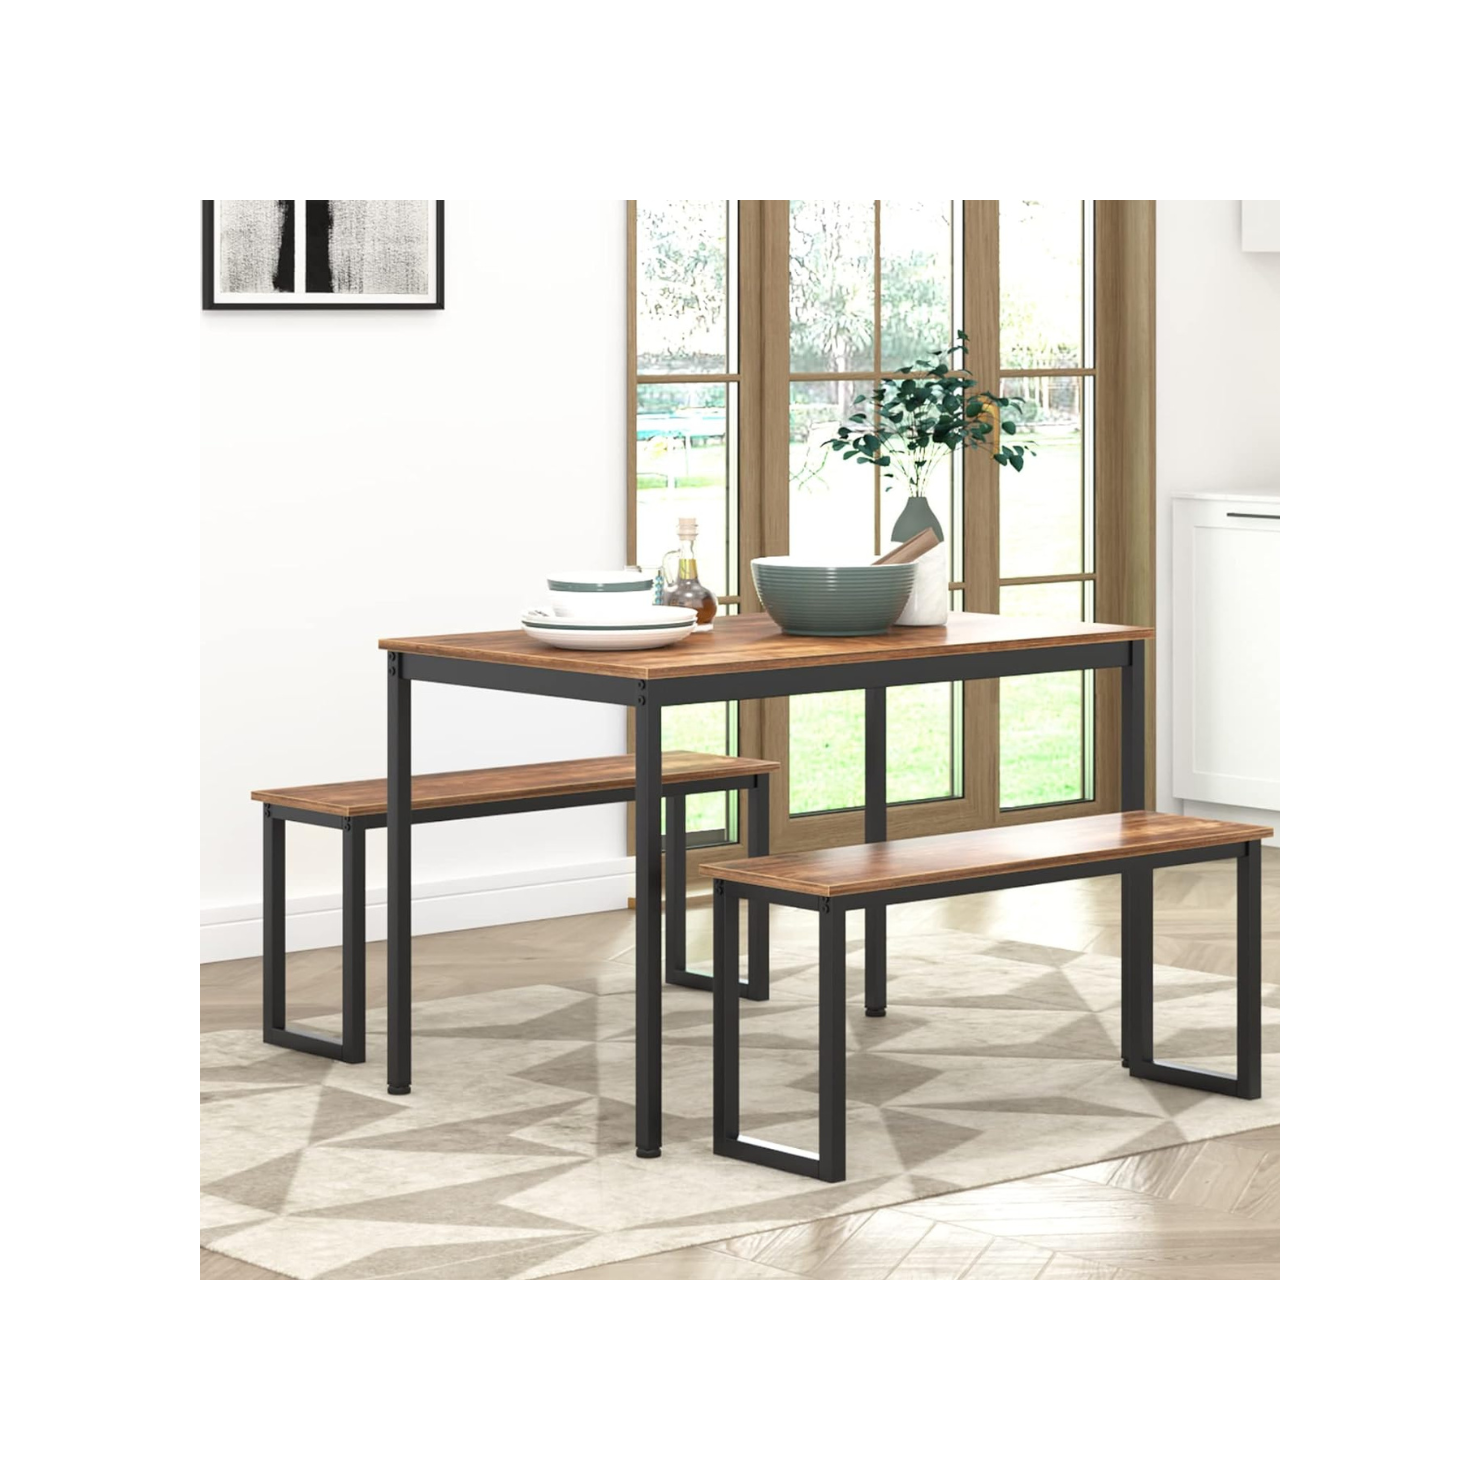 3-Piece SogesHome Kitchen Dining Room 45" Space-Saving Table Sets